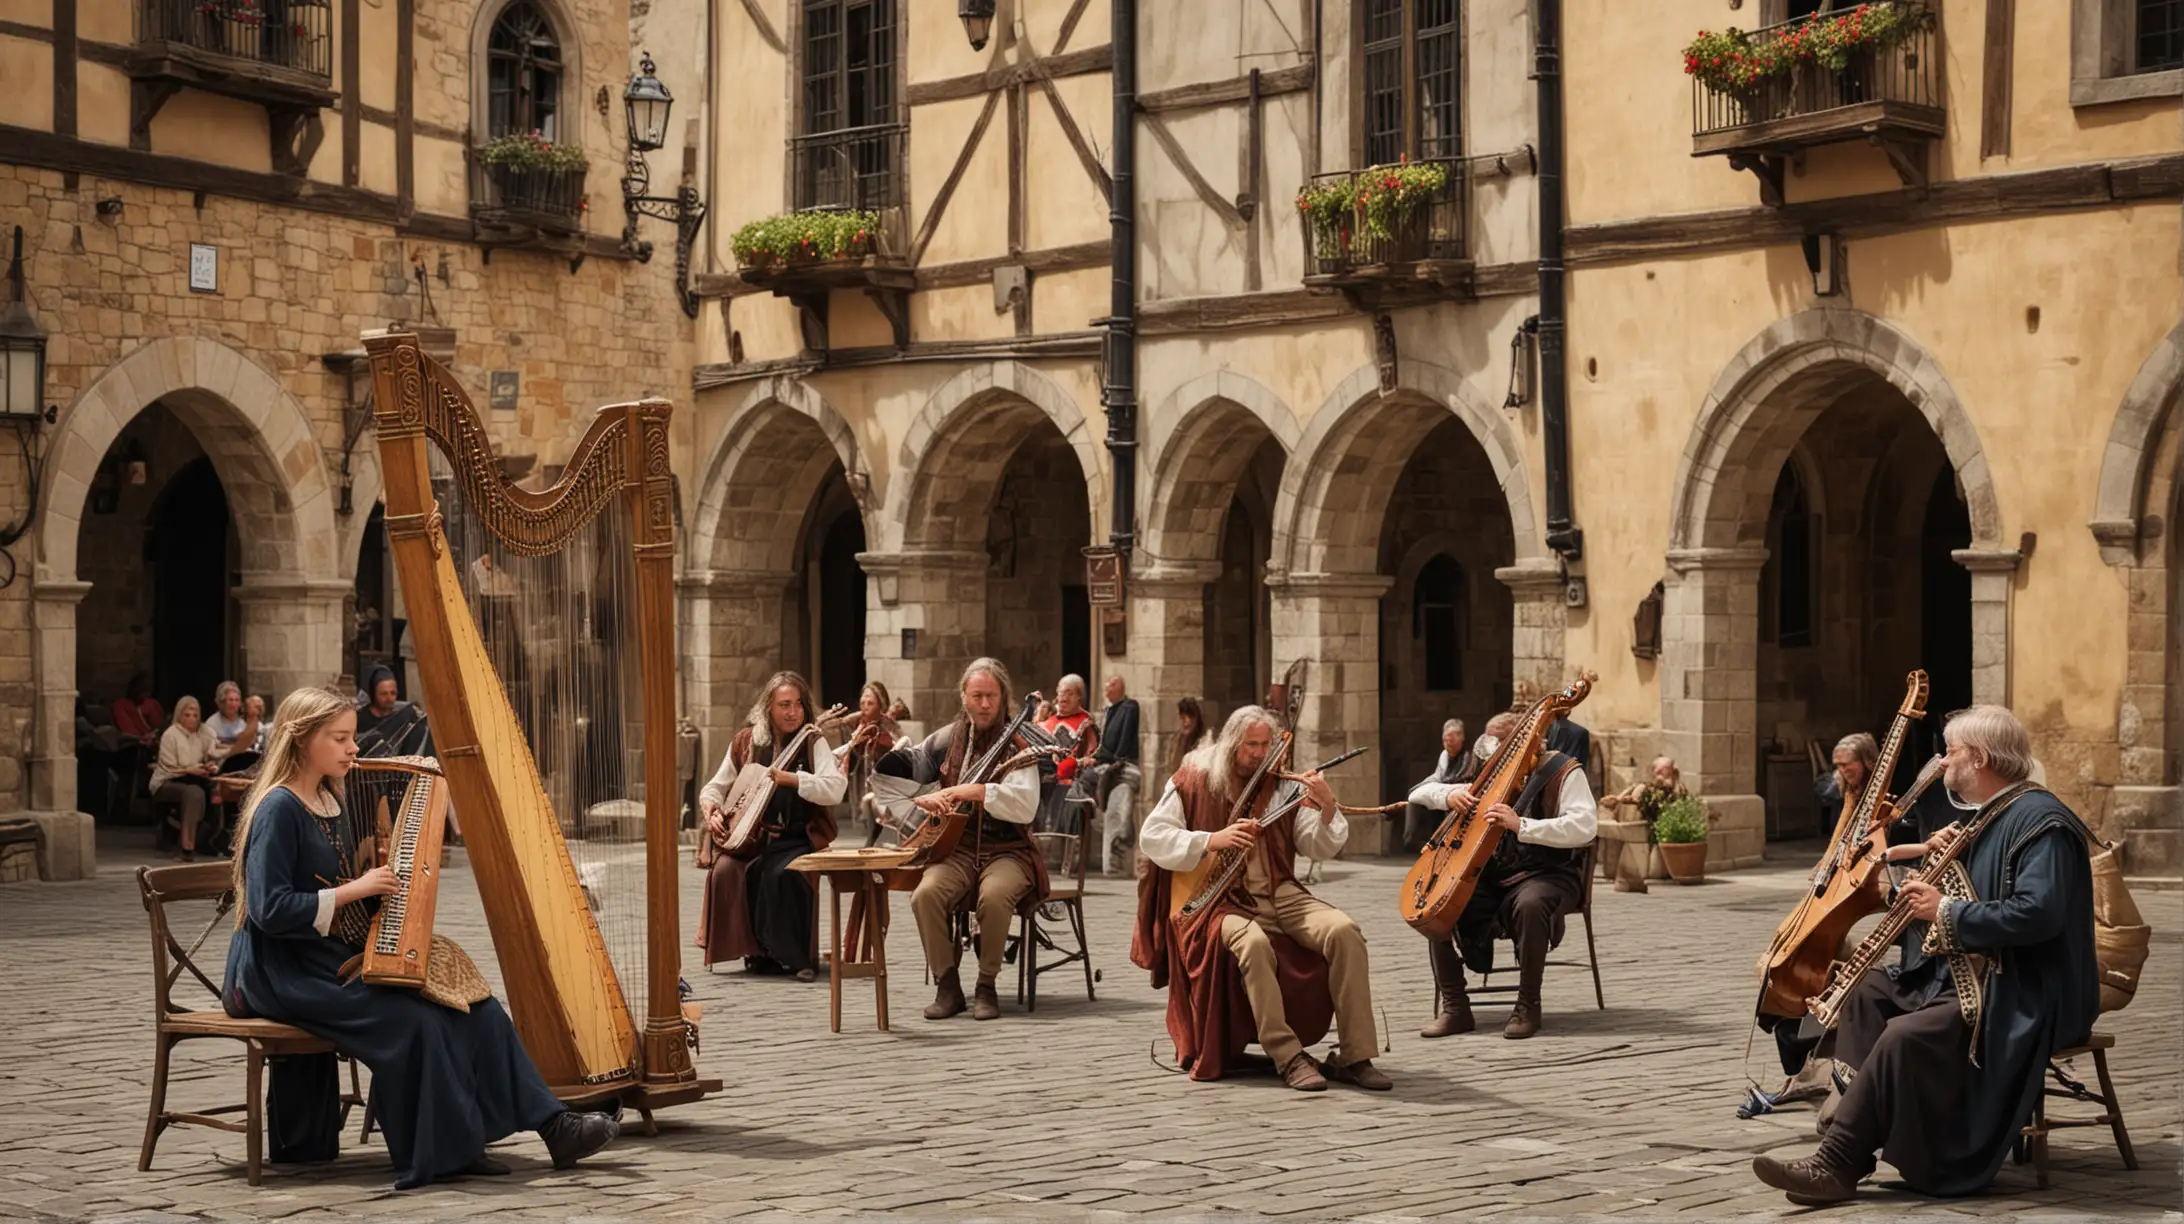 Medieval Musicians Playing Harp and Flute in Town Square